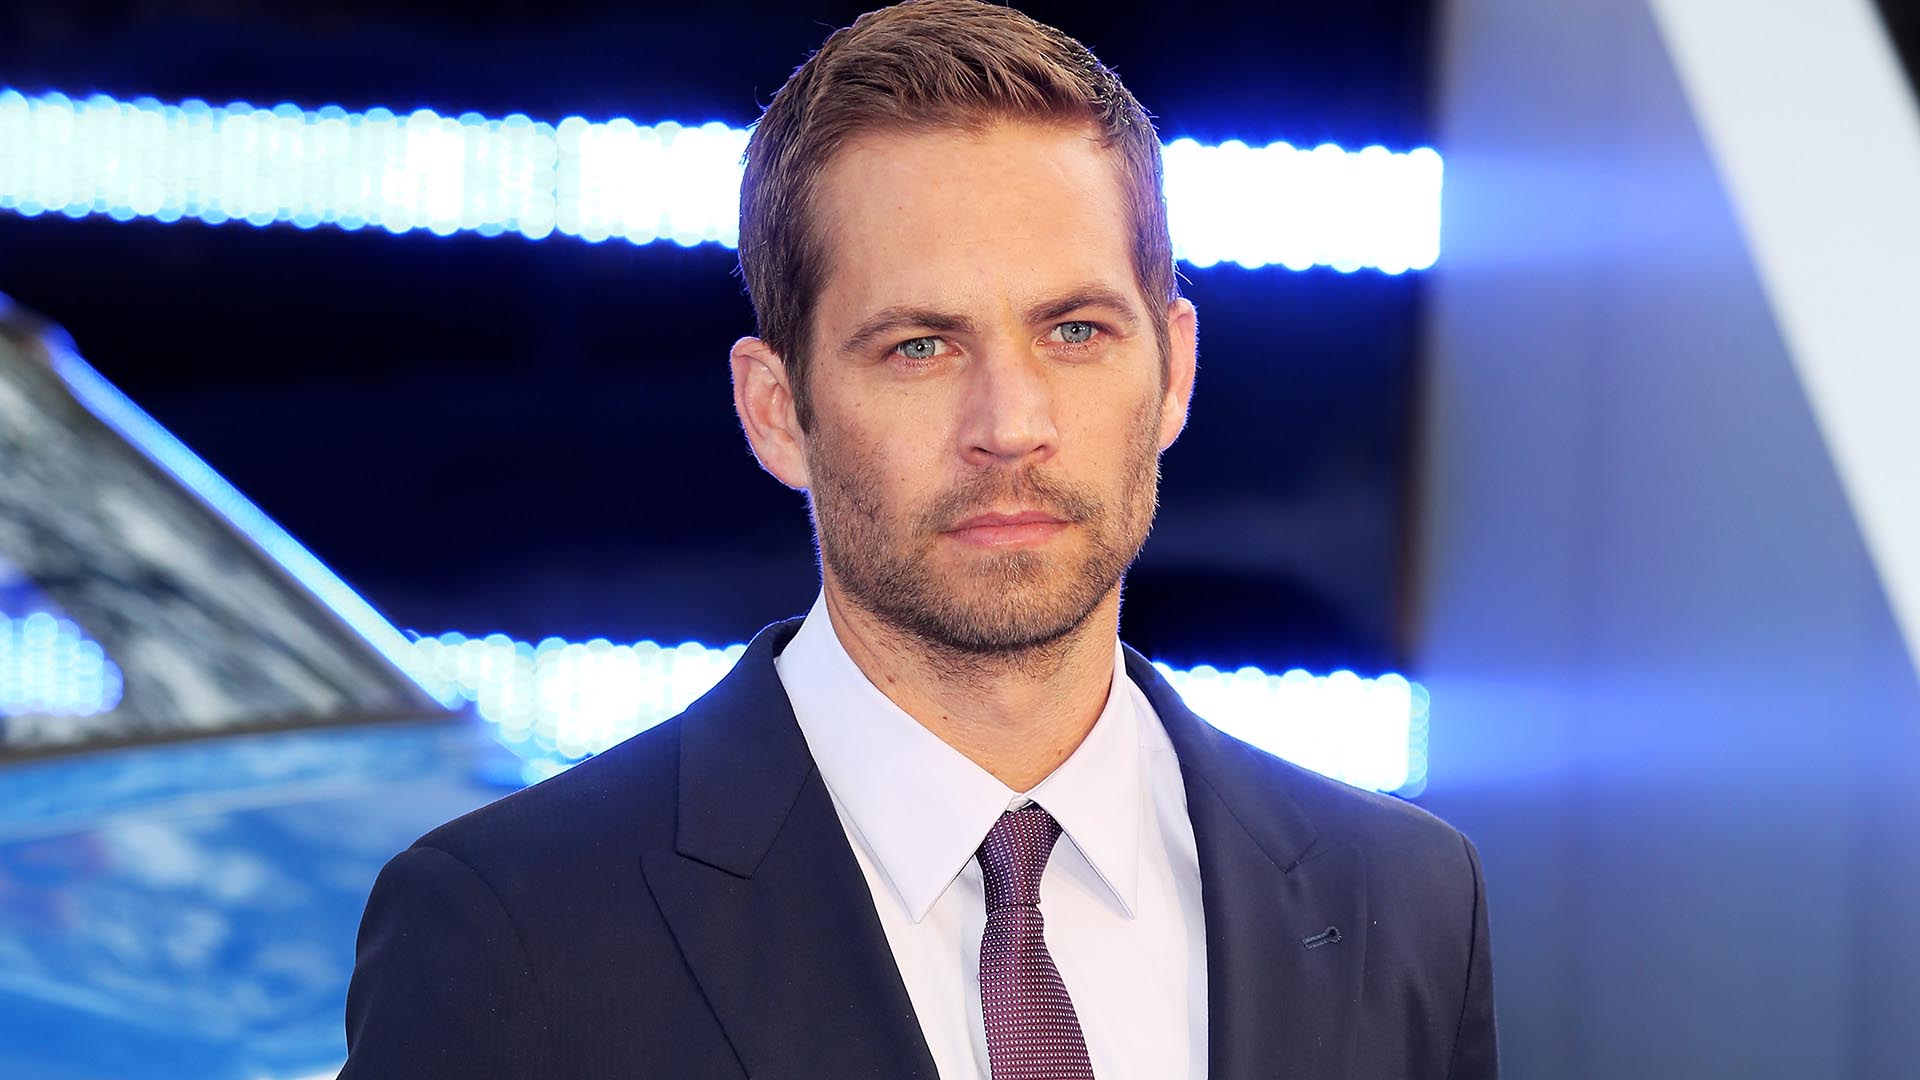 <p>40 years old - This actor raised the 'Fast & Furious' saga to another level. But on November 30, 2013, returning from a charity event of his NGO Reach Out Worldwide, he had an accident with his brand new Porsche Carrera. They say the car was going 180 km/h and that Paul Walker was not the driver. He died on the spot.</p>